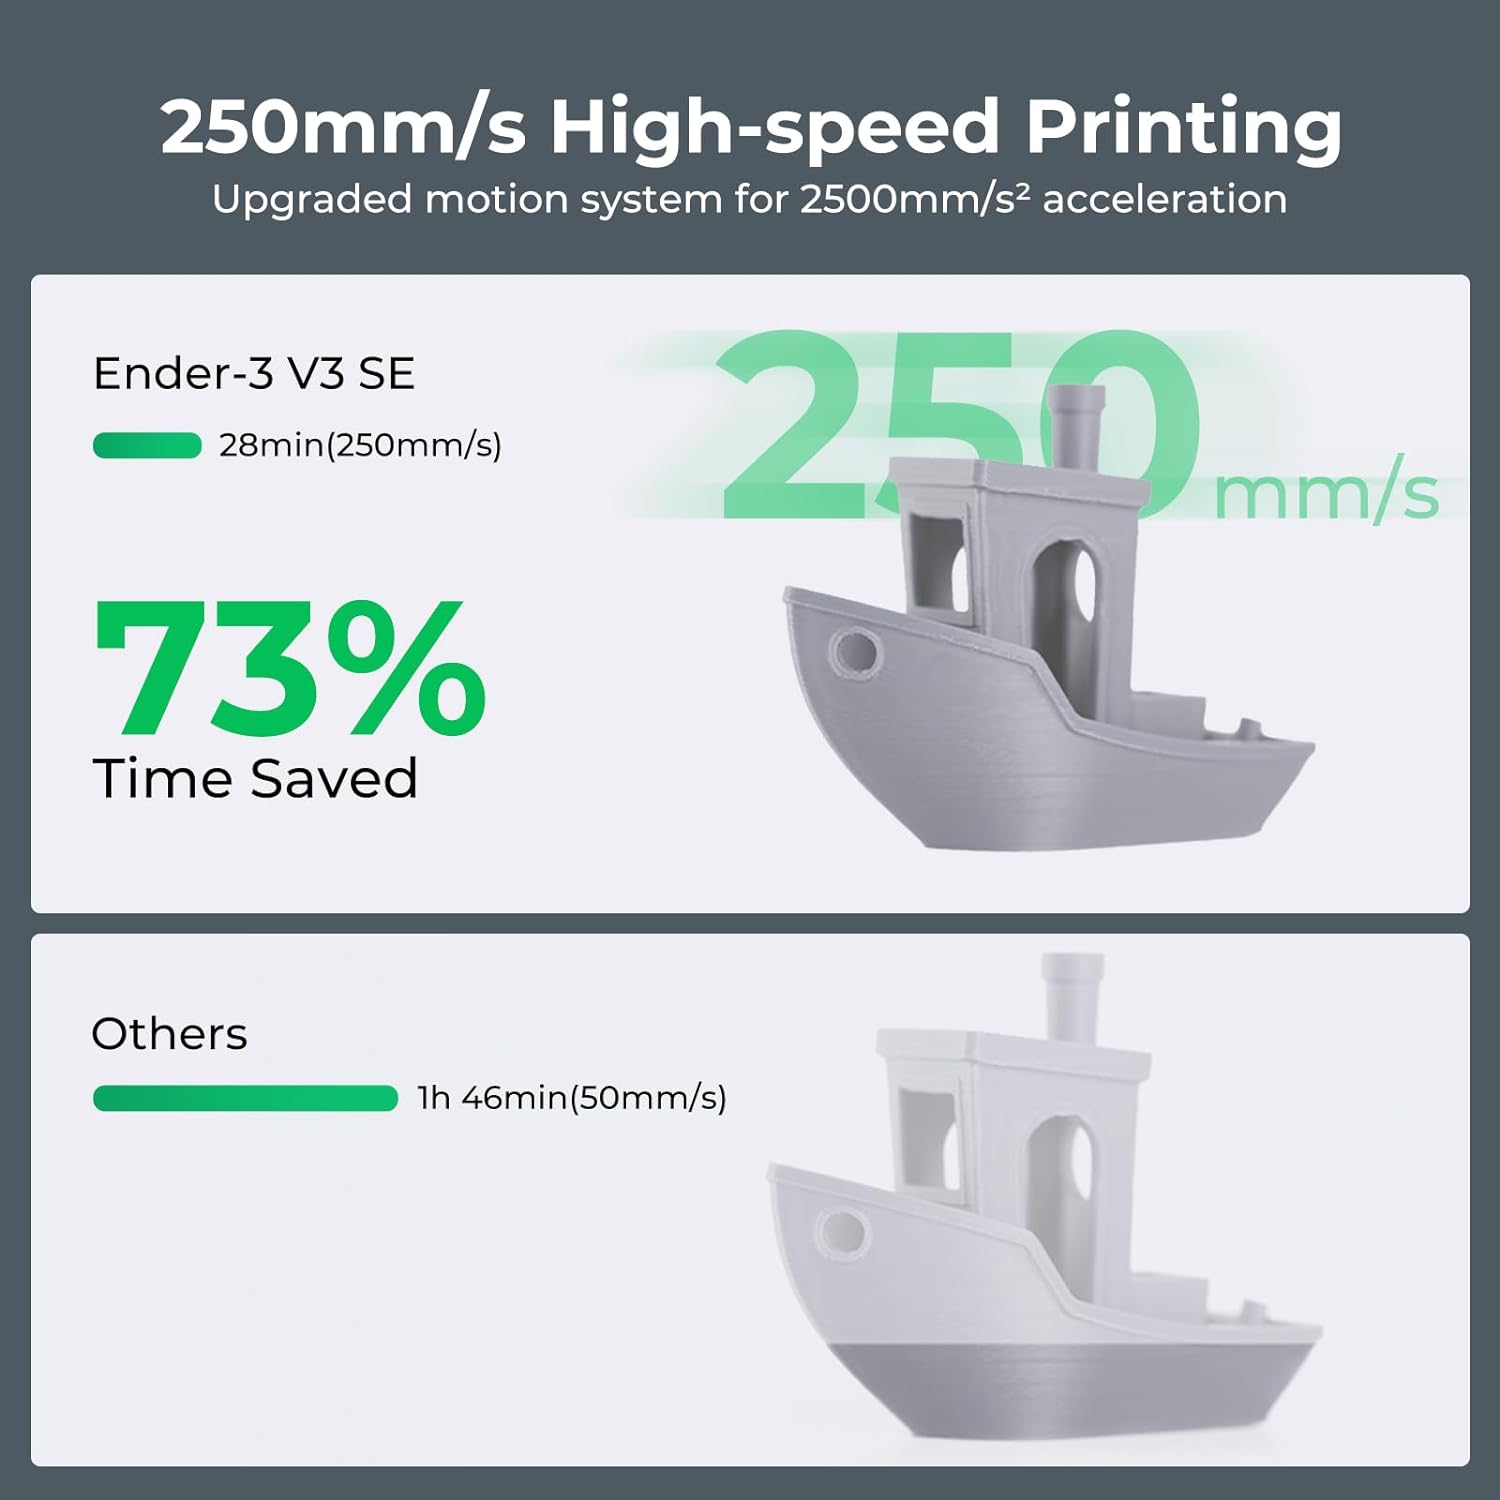 creality-ender-3-v3-se-3d-printer-250mms-cr-touch-auto-leveling-fdm-3d-printer-with-sprite-direct-extruder-dual-z-axis-y-2 Creality Ender 3 V3 SE 3D Printer Review